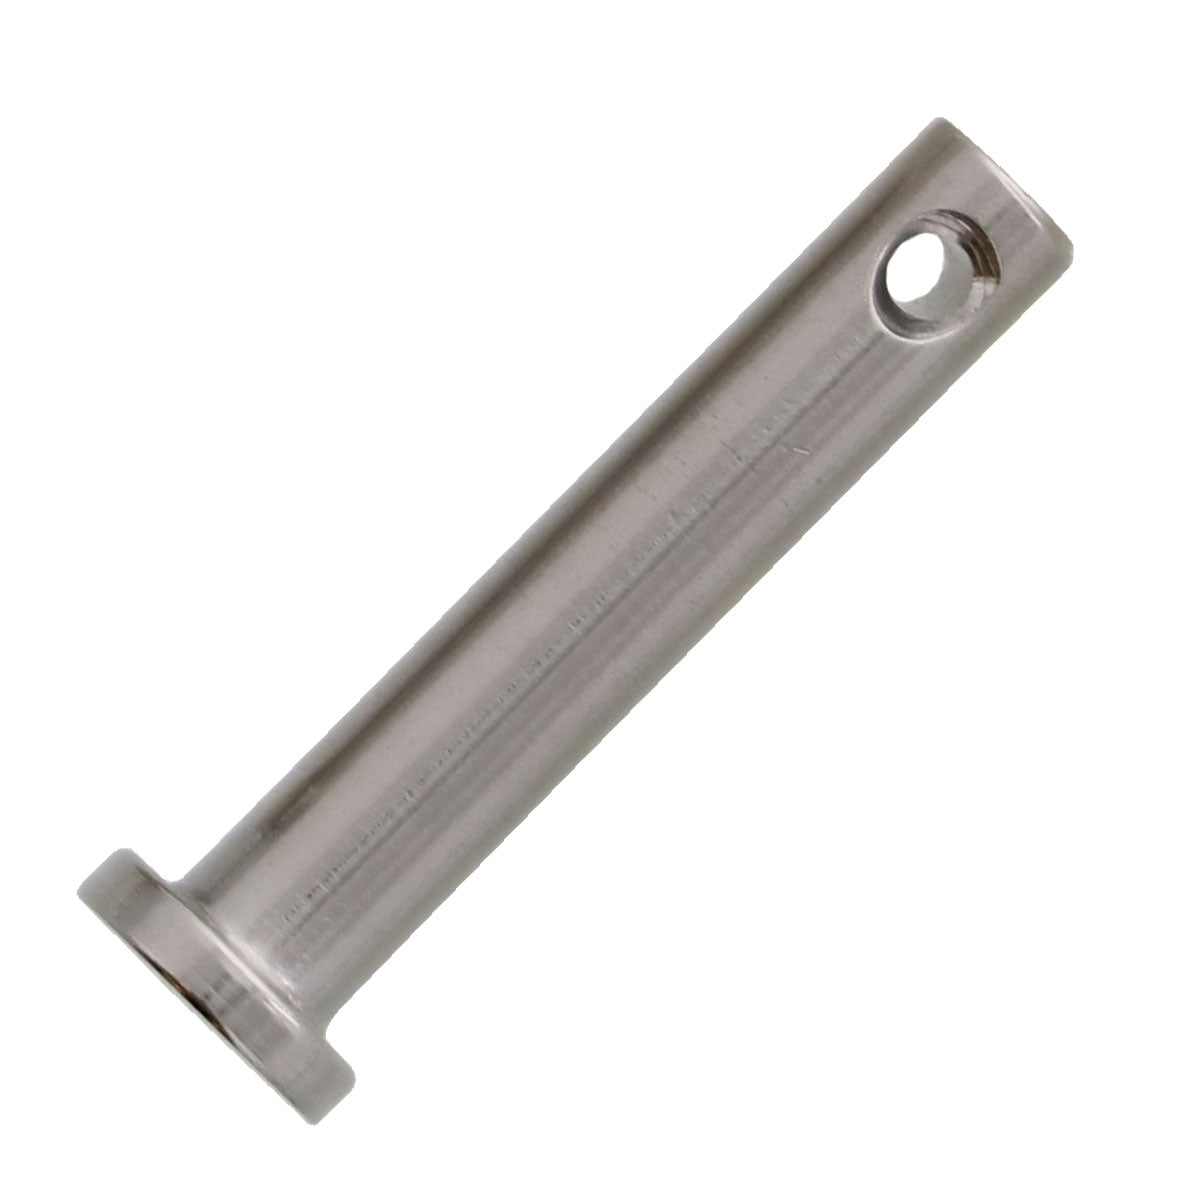 6mm x 25mm Stainless Steel Clevis Pin